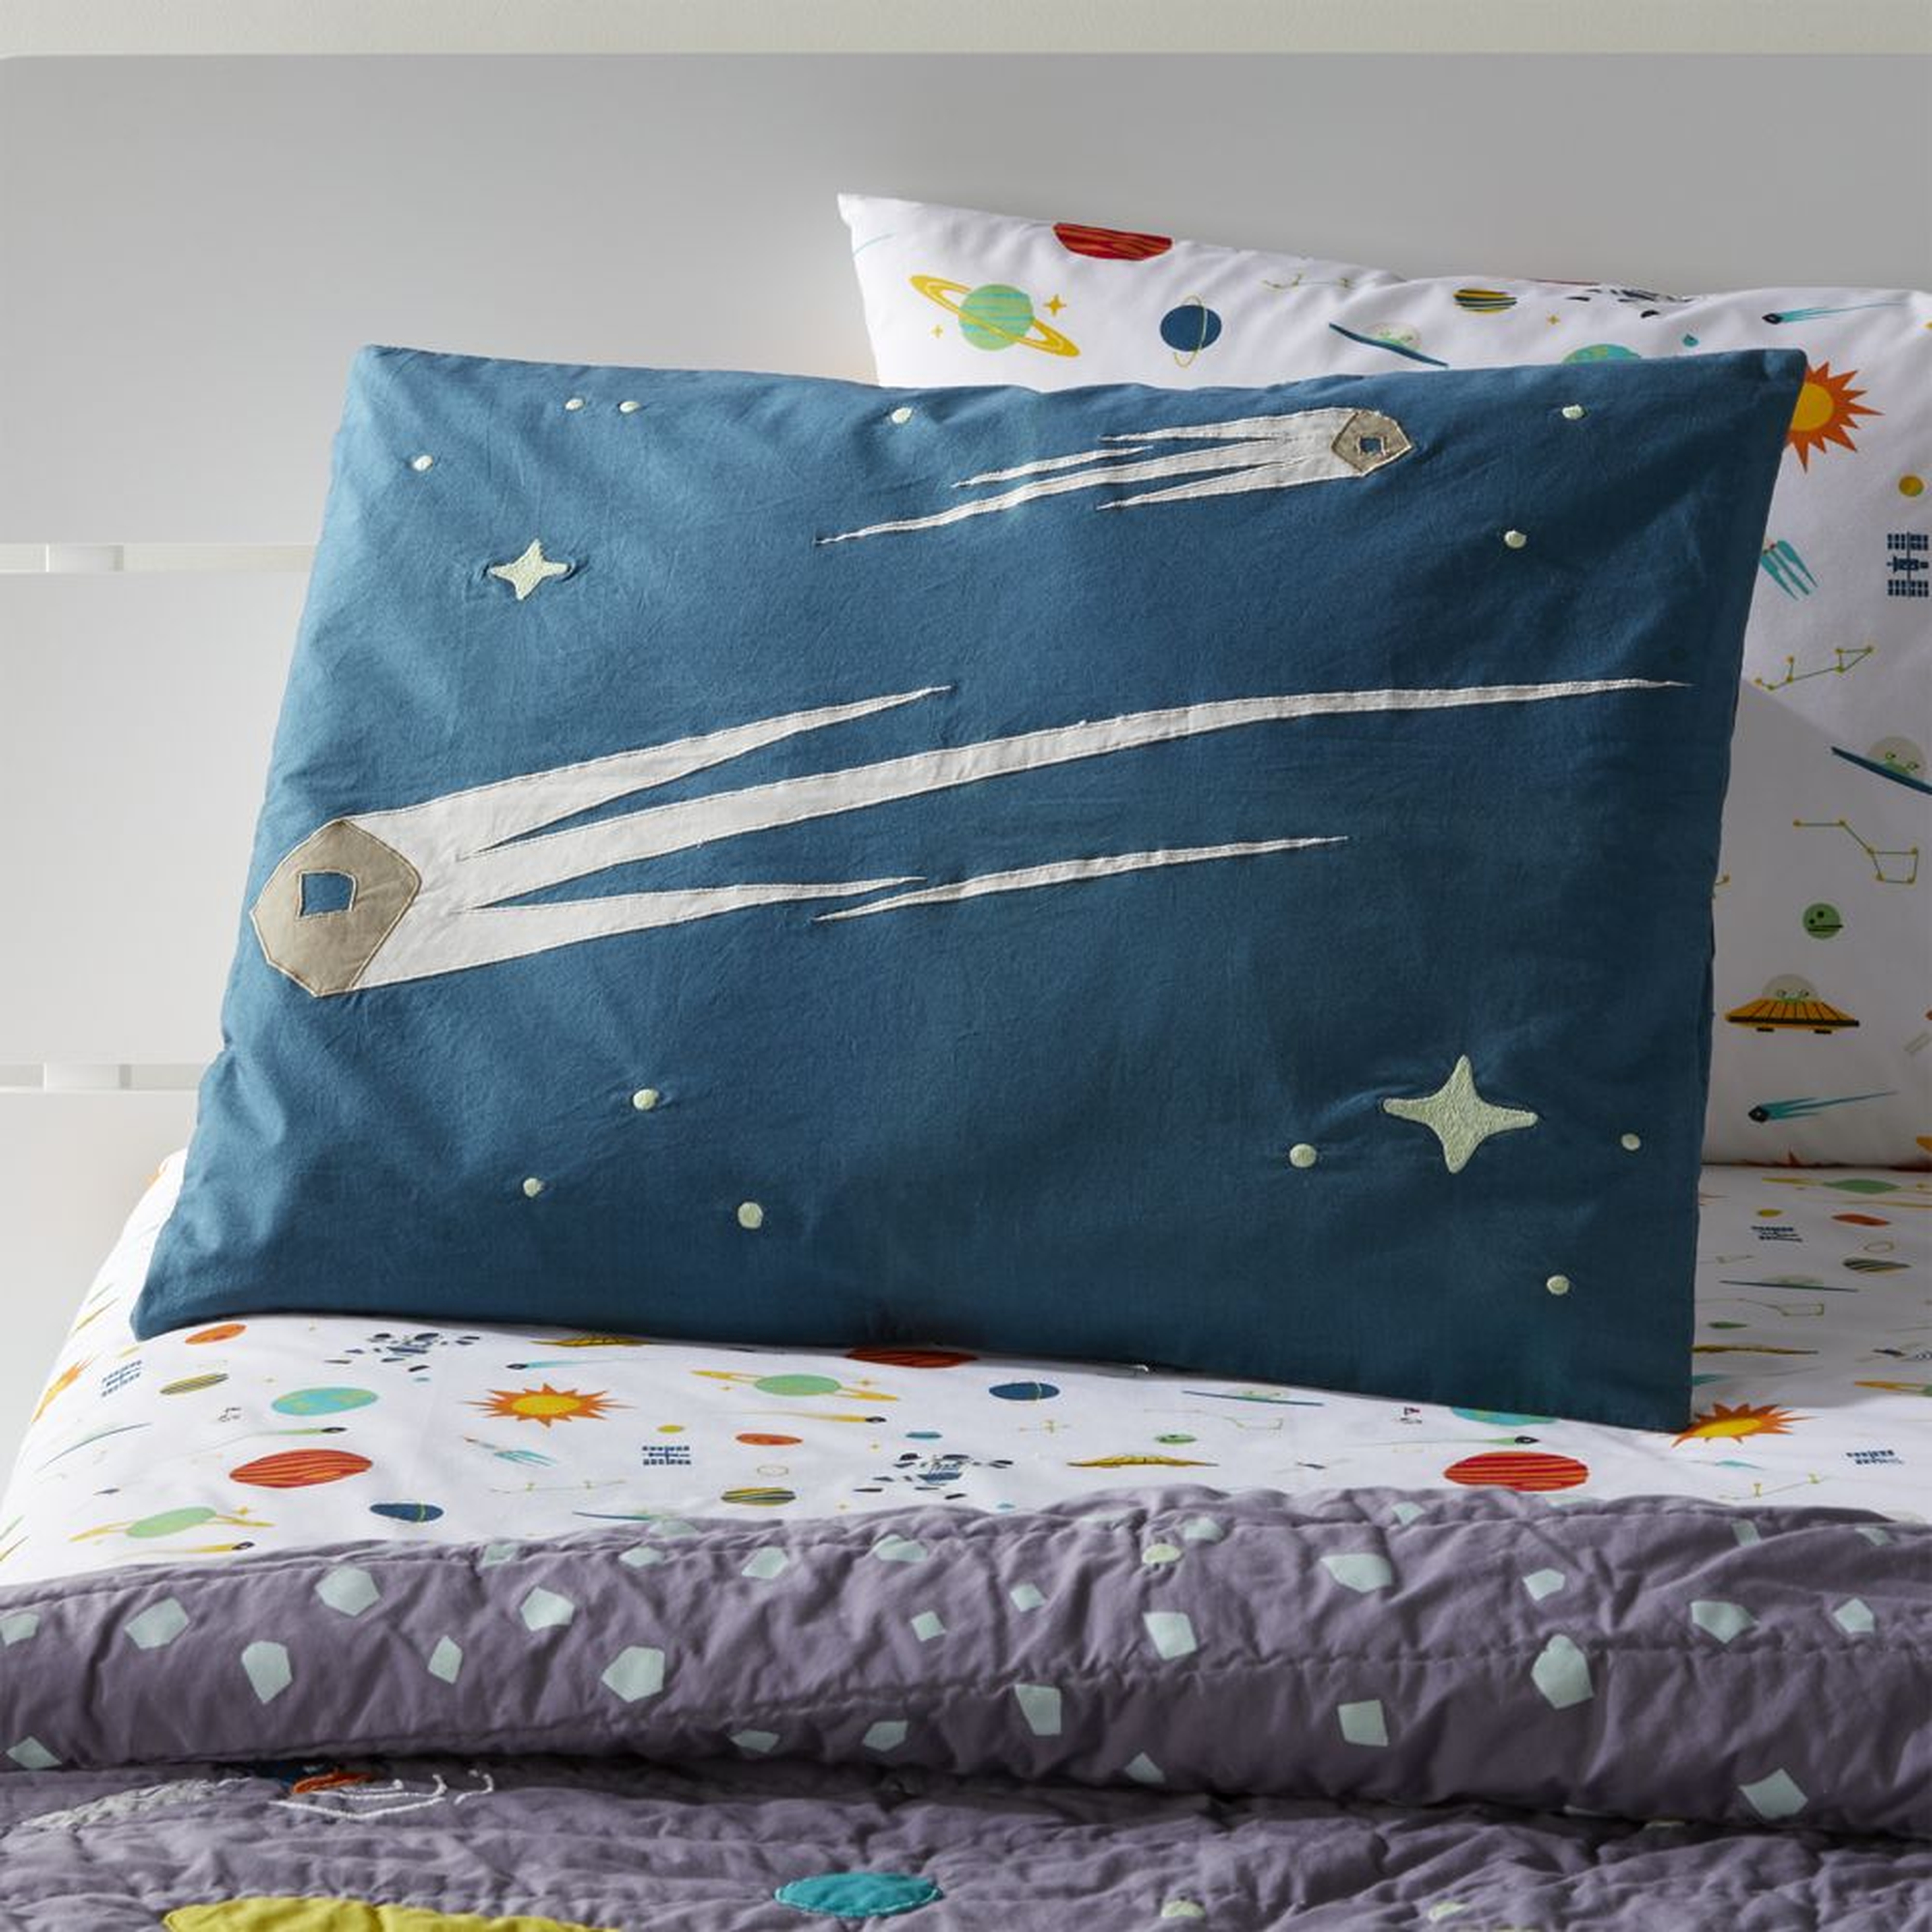 Cosmos Kids Pillow Sham - Crate and Barrel